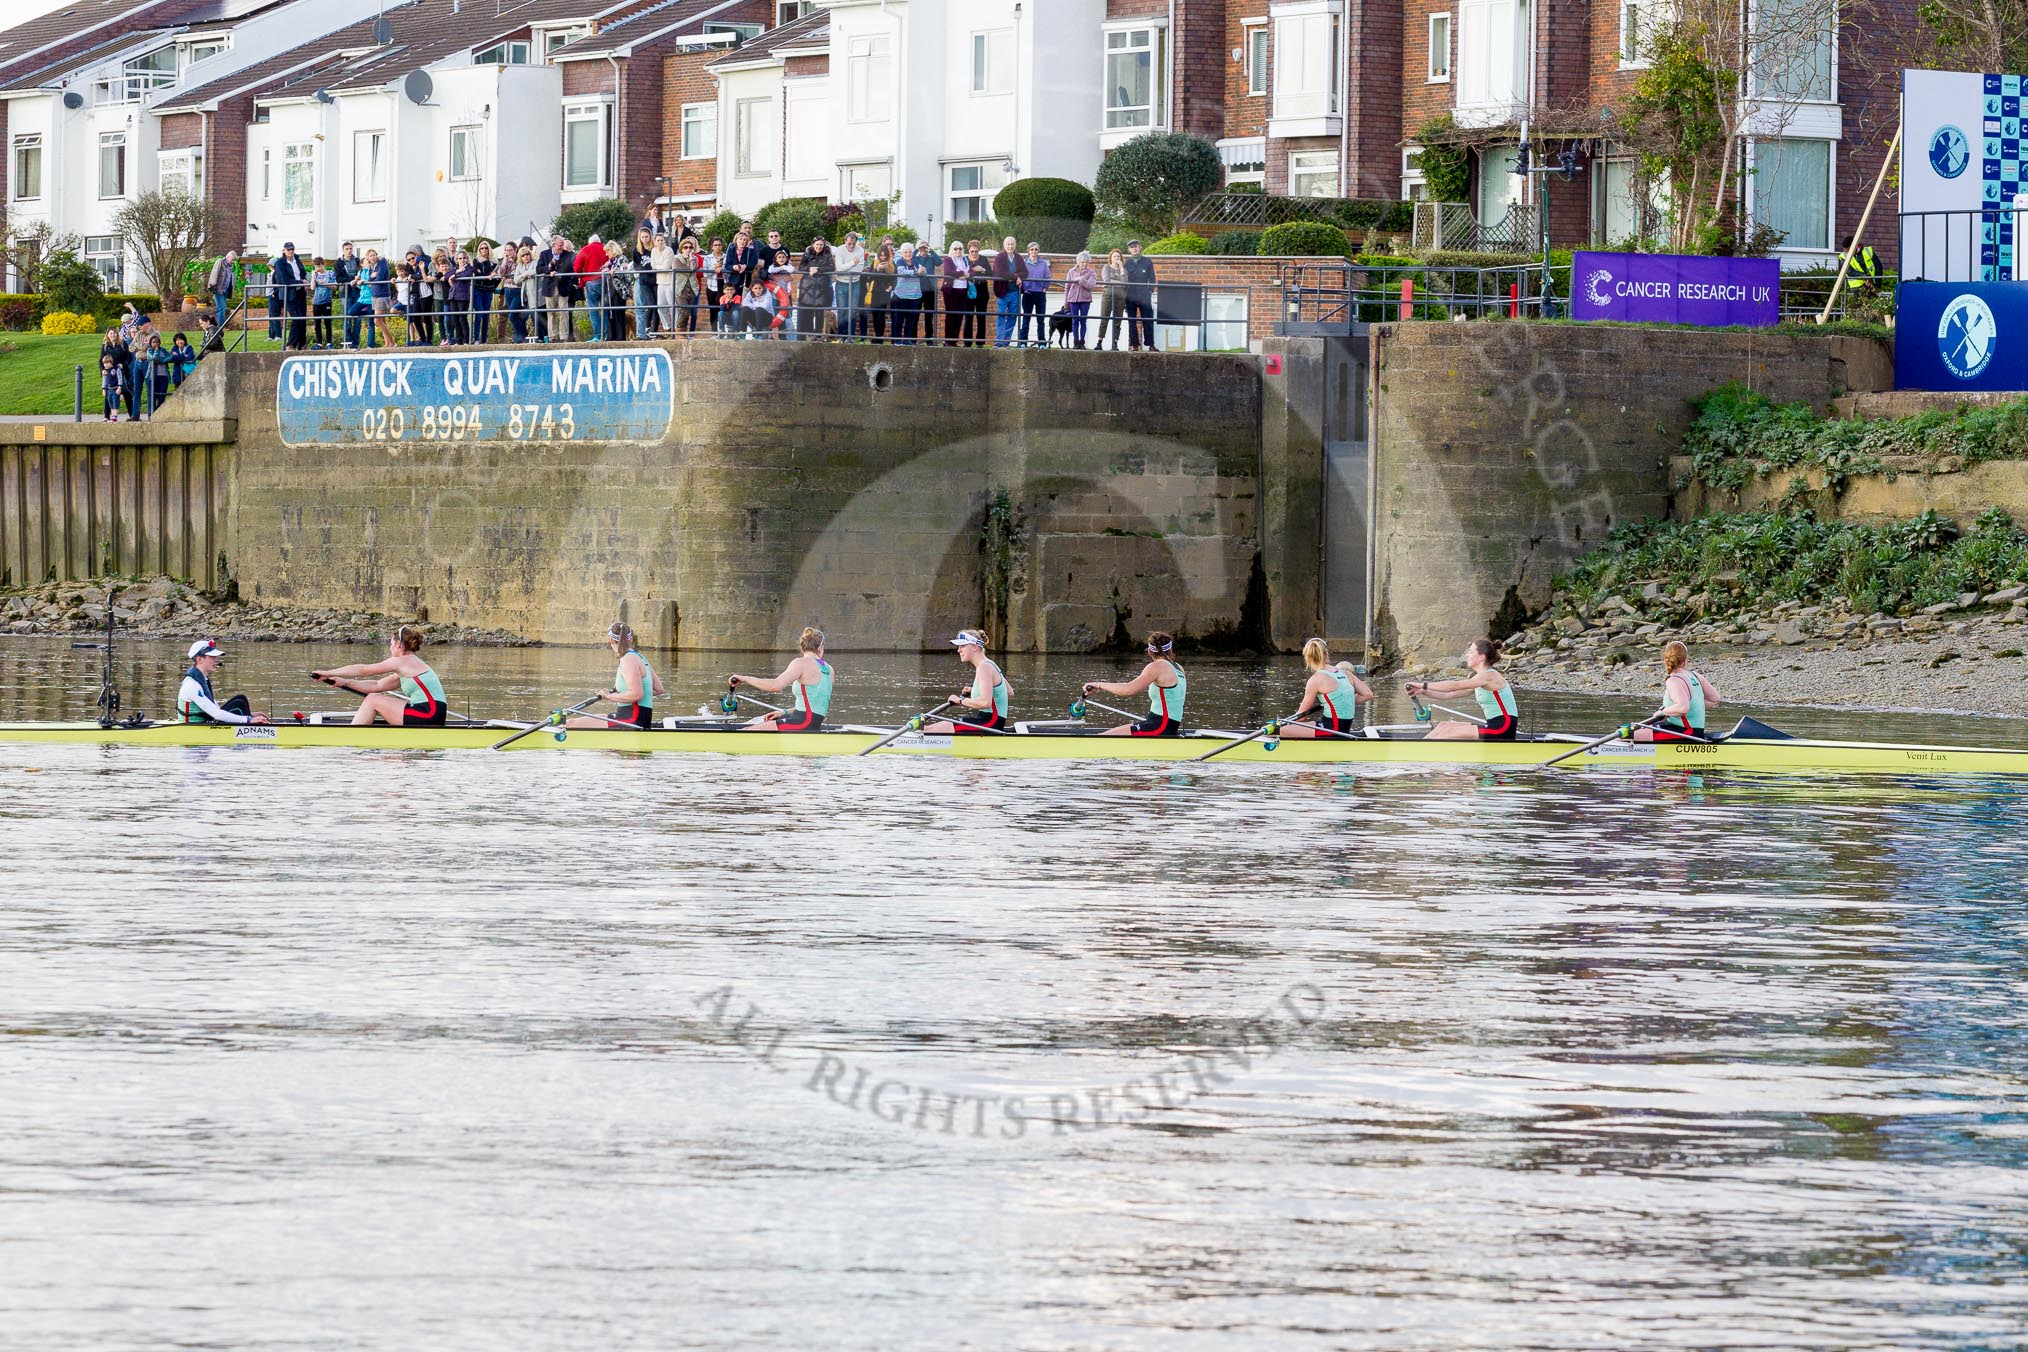 The Boat Race season 2017 -  The Cancer Research Women's Boat Race: CUWBC after having won the race at Chiswicl Quay Marina.
River Thames between Putney Bridge and Mortlake,
London SW15,

United Kingdom,
on 02 April 2017 at 16:57, image #192